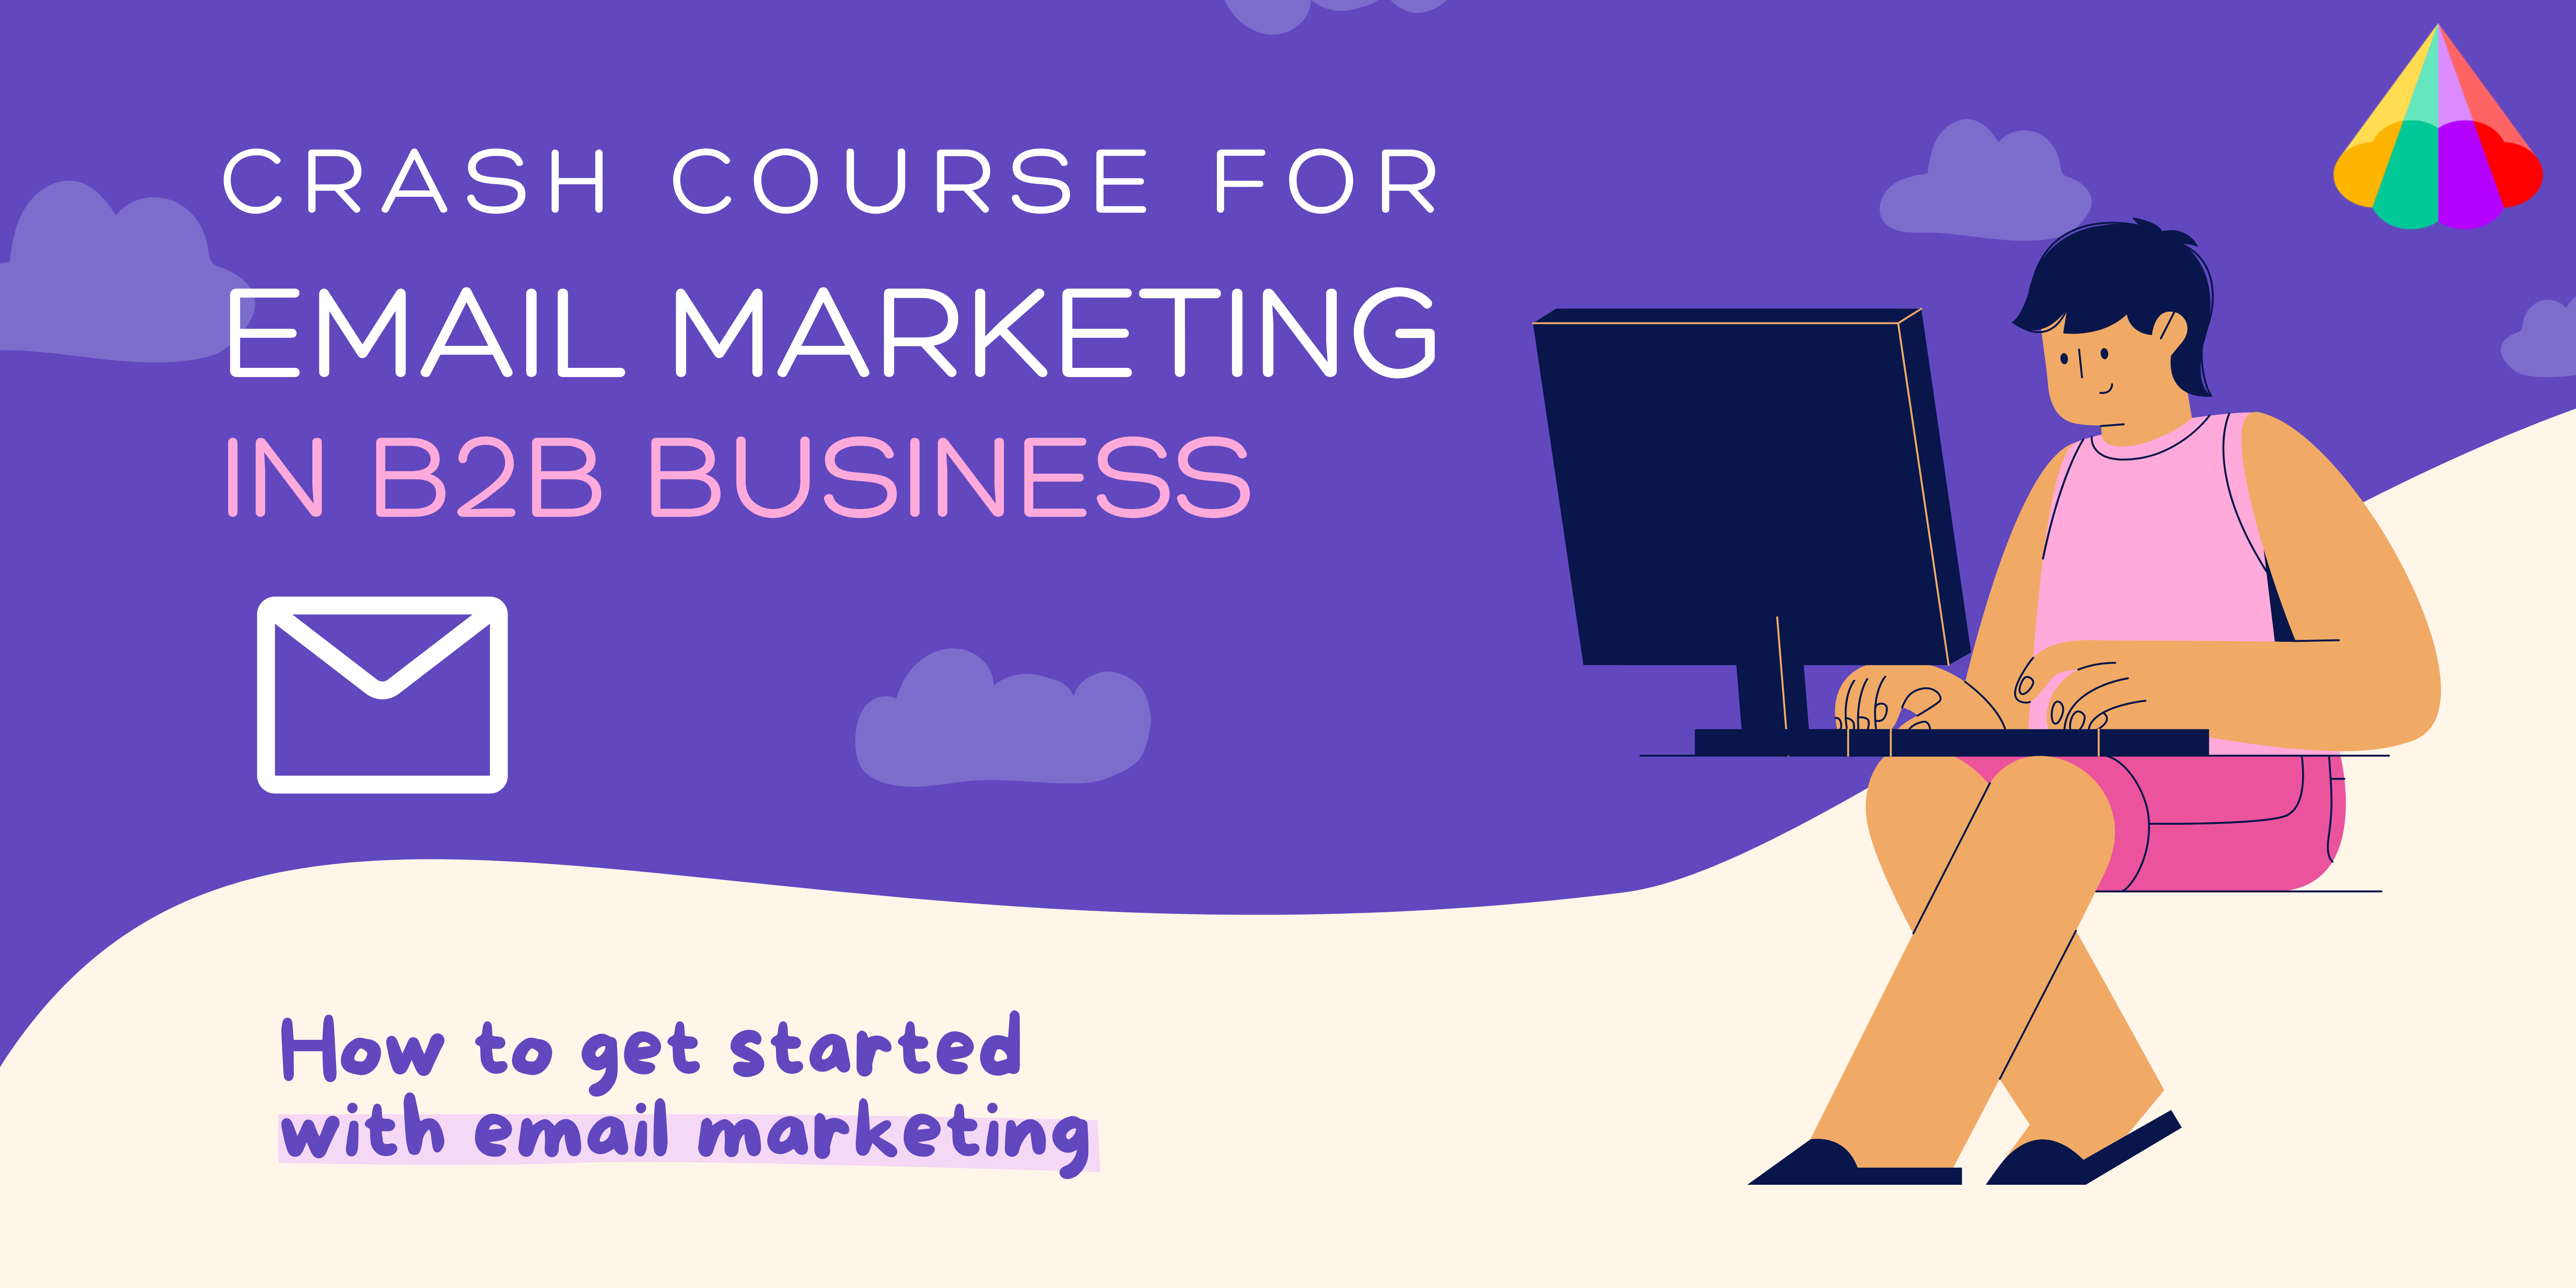 Webinar: Crash Course for Email Marketing for B2B Business